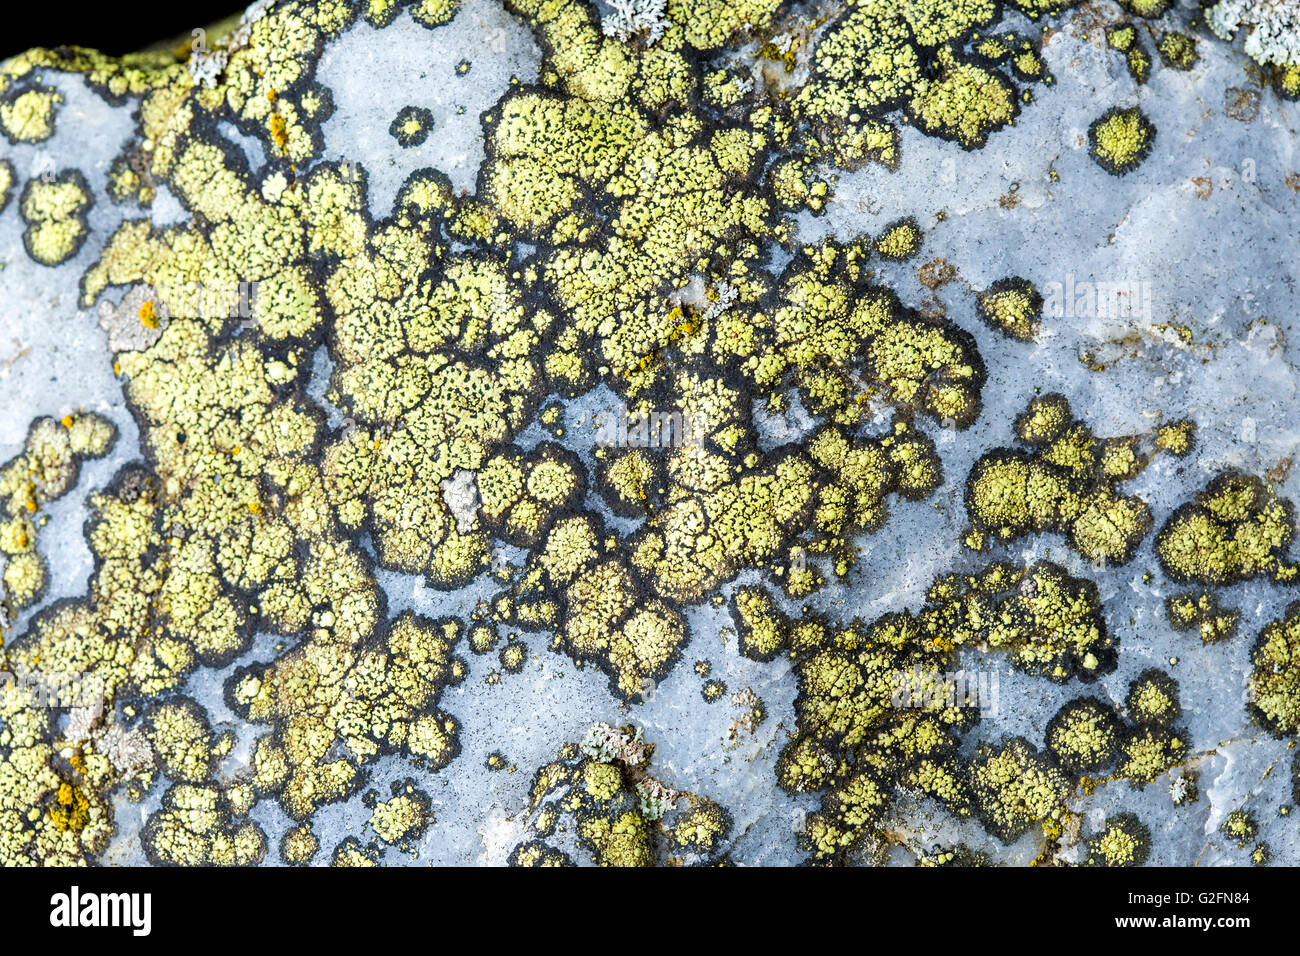 Yellow lichens growing on a natural stone. Can be used as texture or background Stock Photo